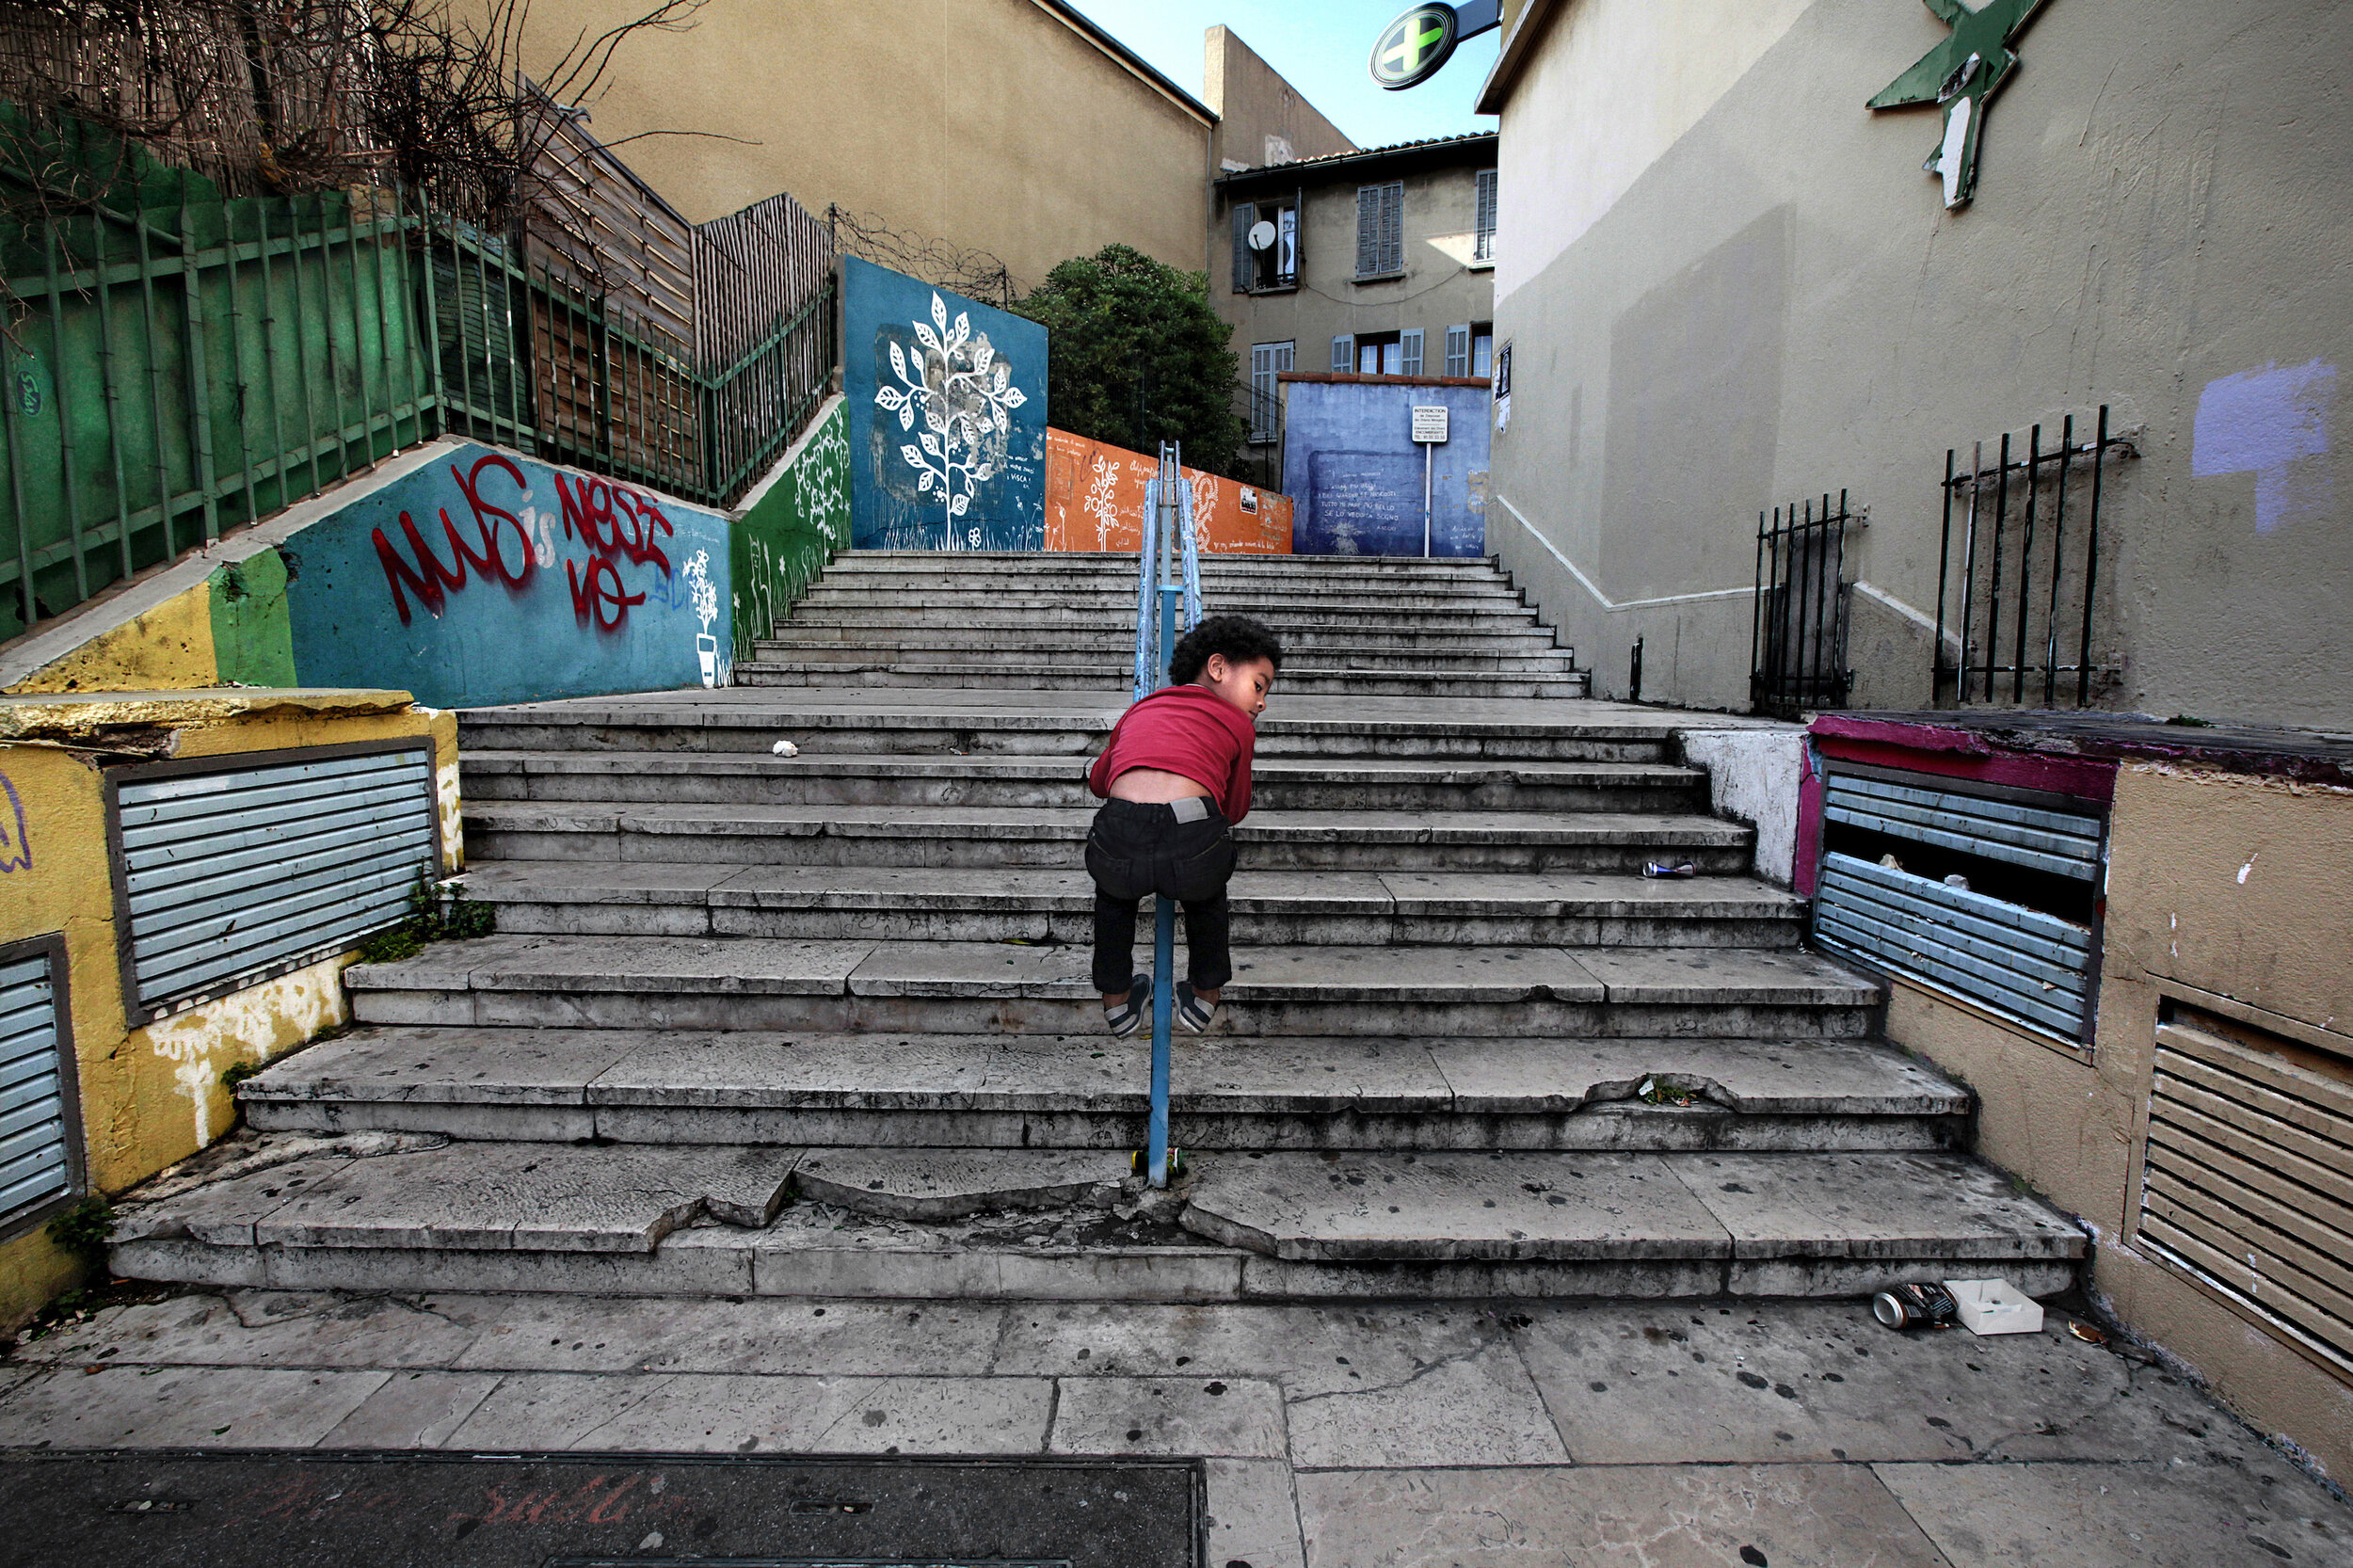   France. Marseille. 2014. A child slides down the stairs at a street in the 3rd arrondissement. Home to a very large and diverse immigrant population, the 3rd arrondissement is known for its deprivation and increasing poverty in comparison with othe